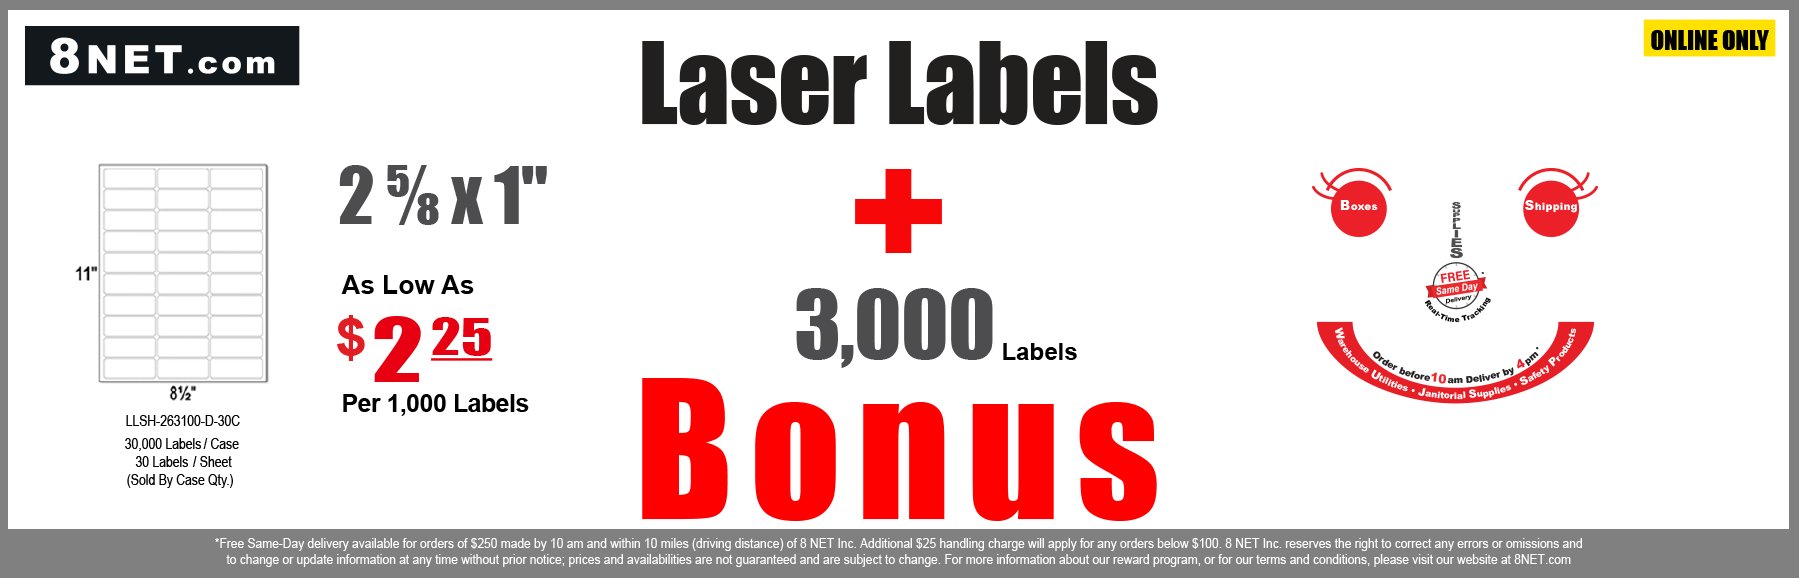 https://www.8net.com/shipping-supply/shipping-labels/laserlables8-1-2-11-sheet-tables.html